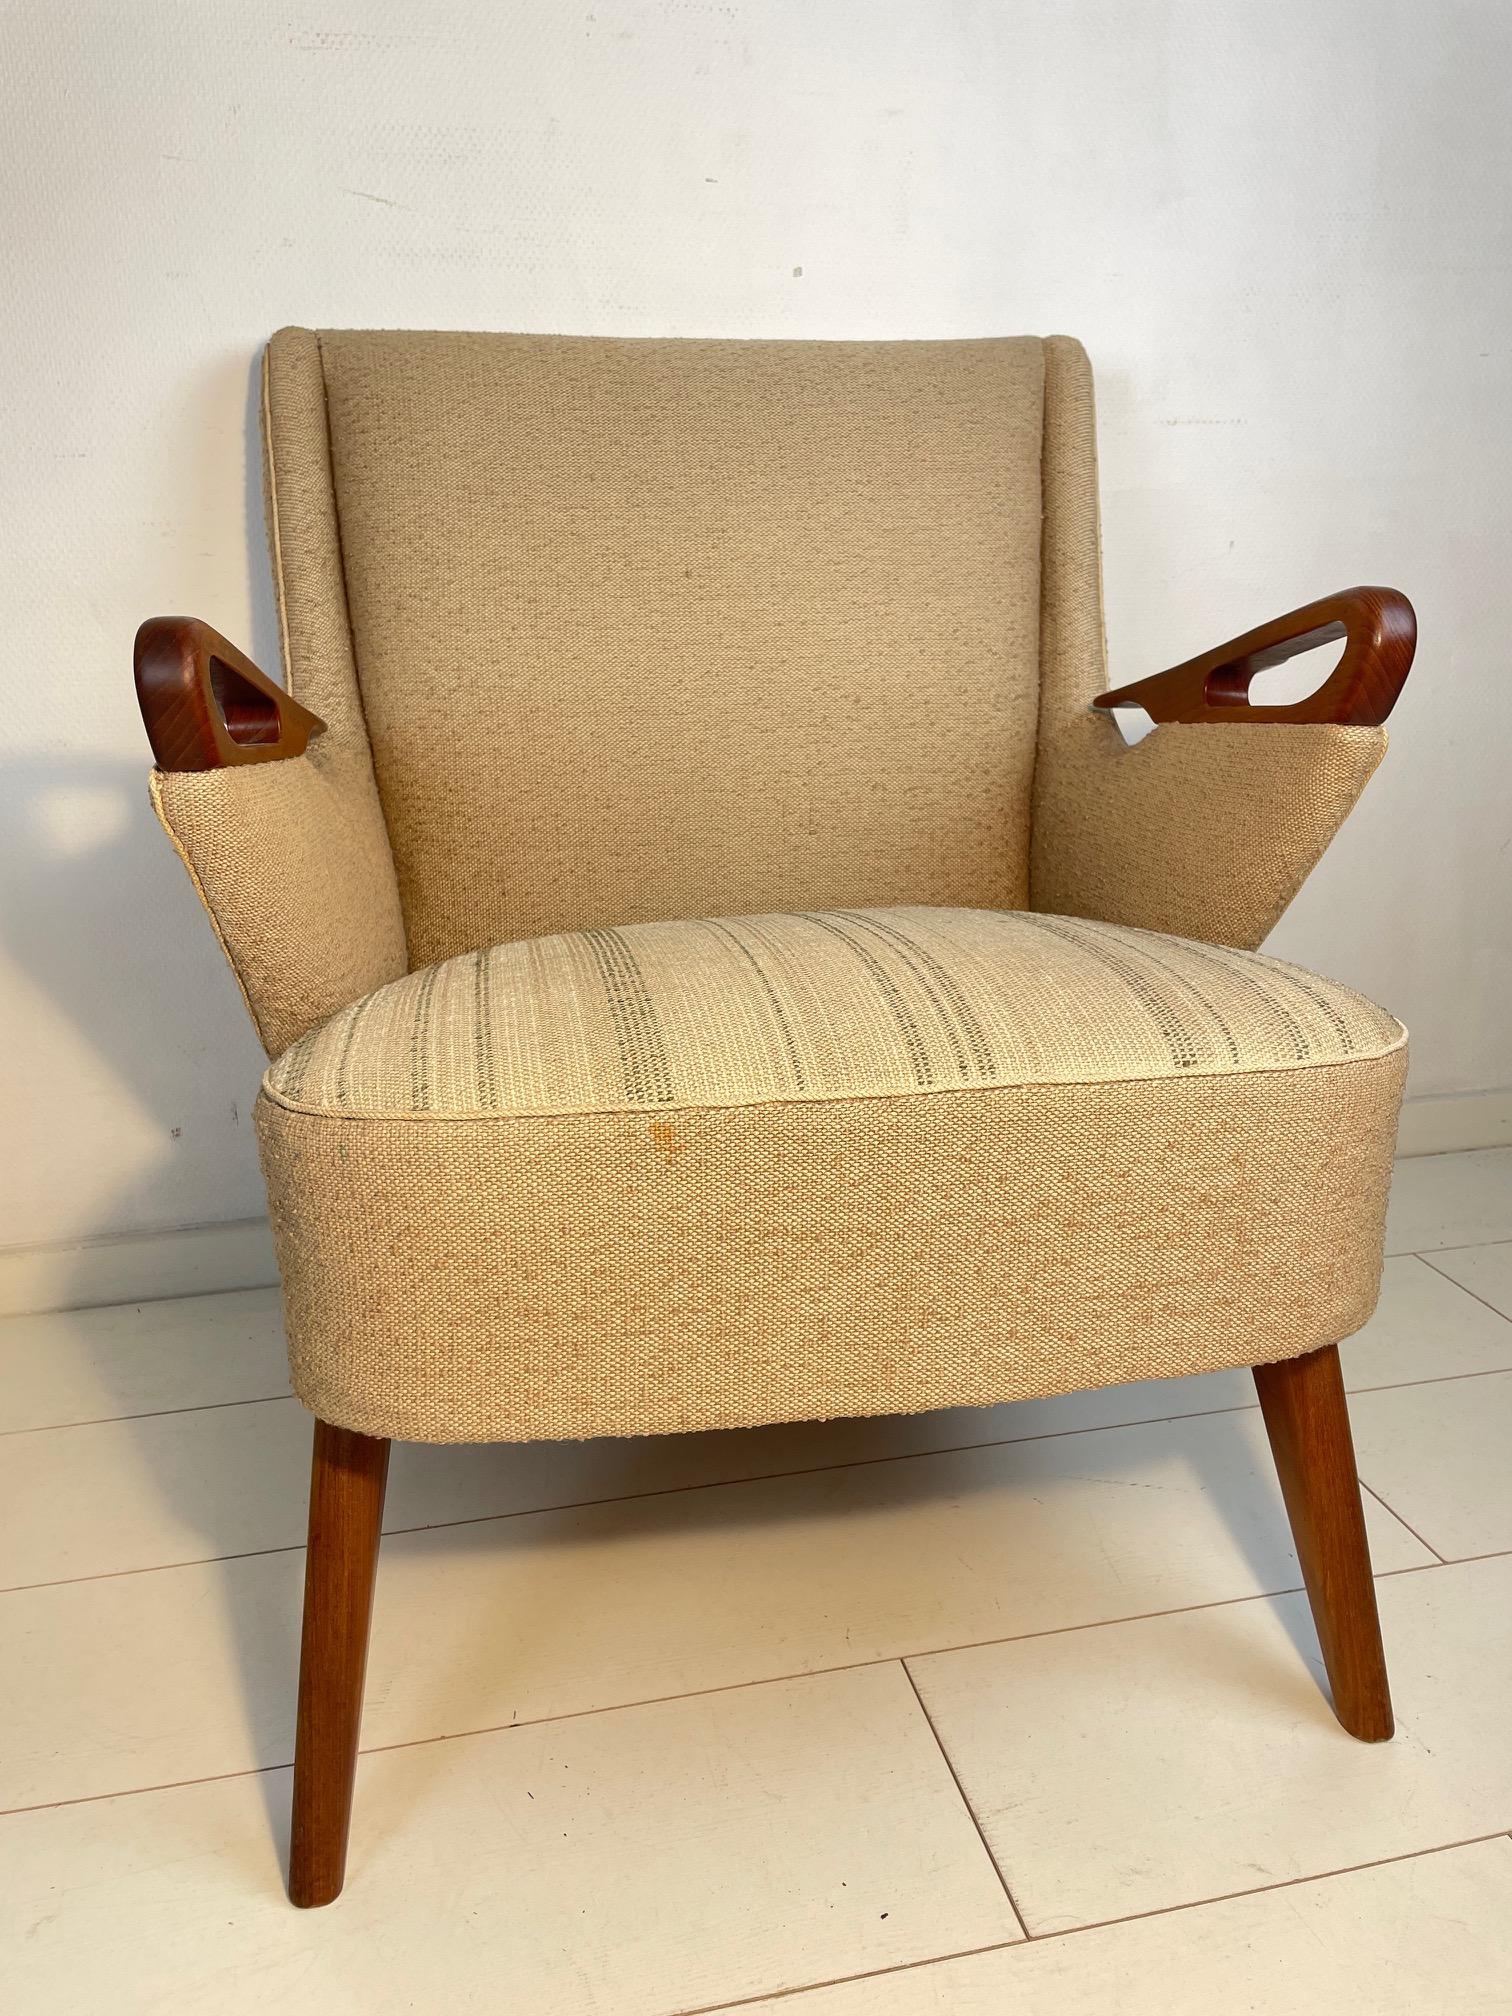 Midcentury designer lounge chair by Chresten Findahl Brodersen. This lounge chair was made under design No. CFB52 in the Findahl Møbelfabrik in the mid 50s (Denmark). This is as pure as midcentury quality in chair form gets, beautiful lines and well